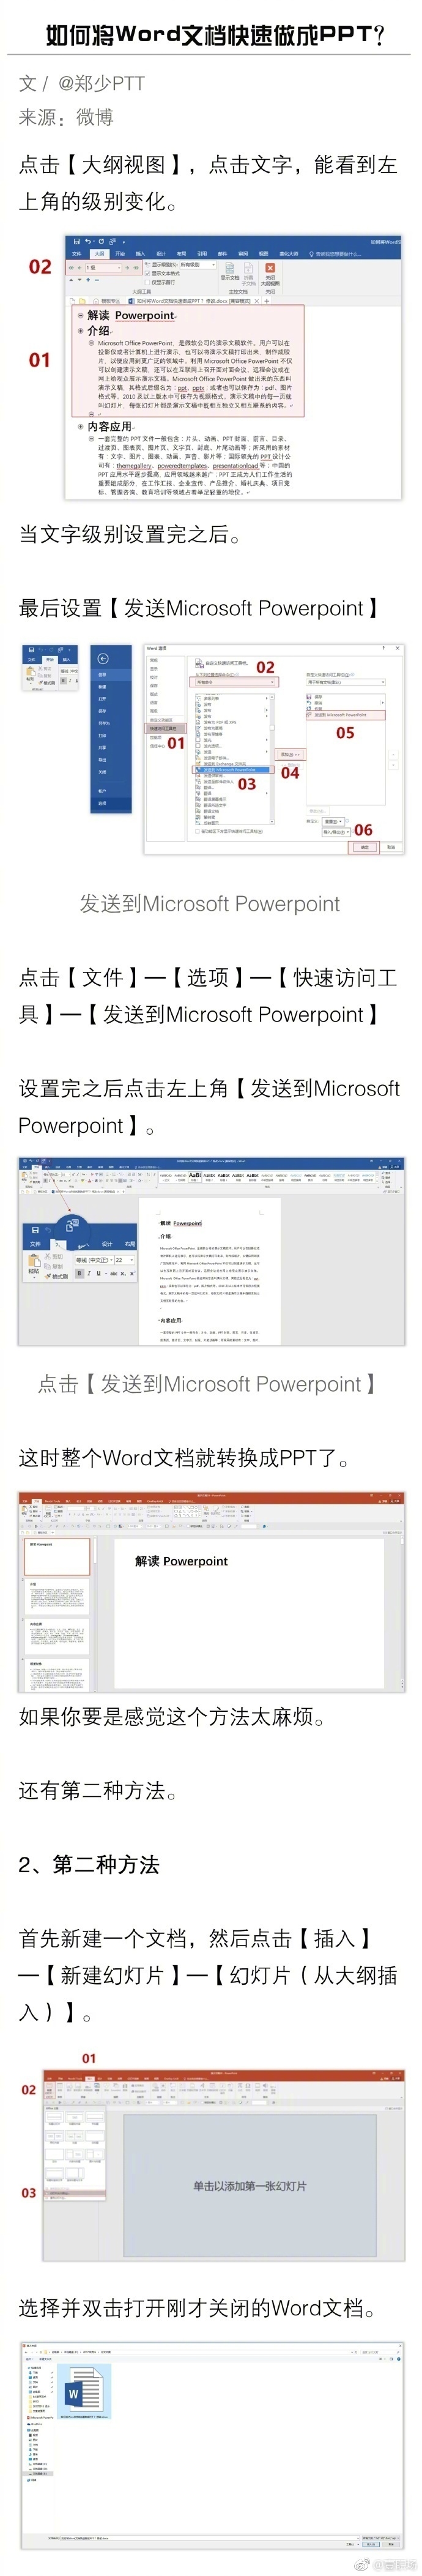 How to quickly turn a Word document into PPT?